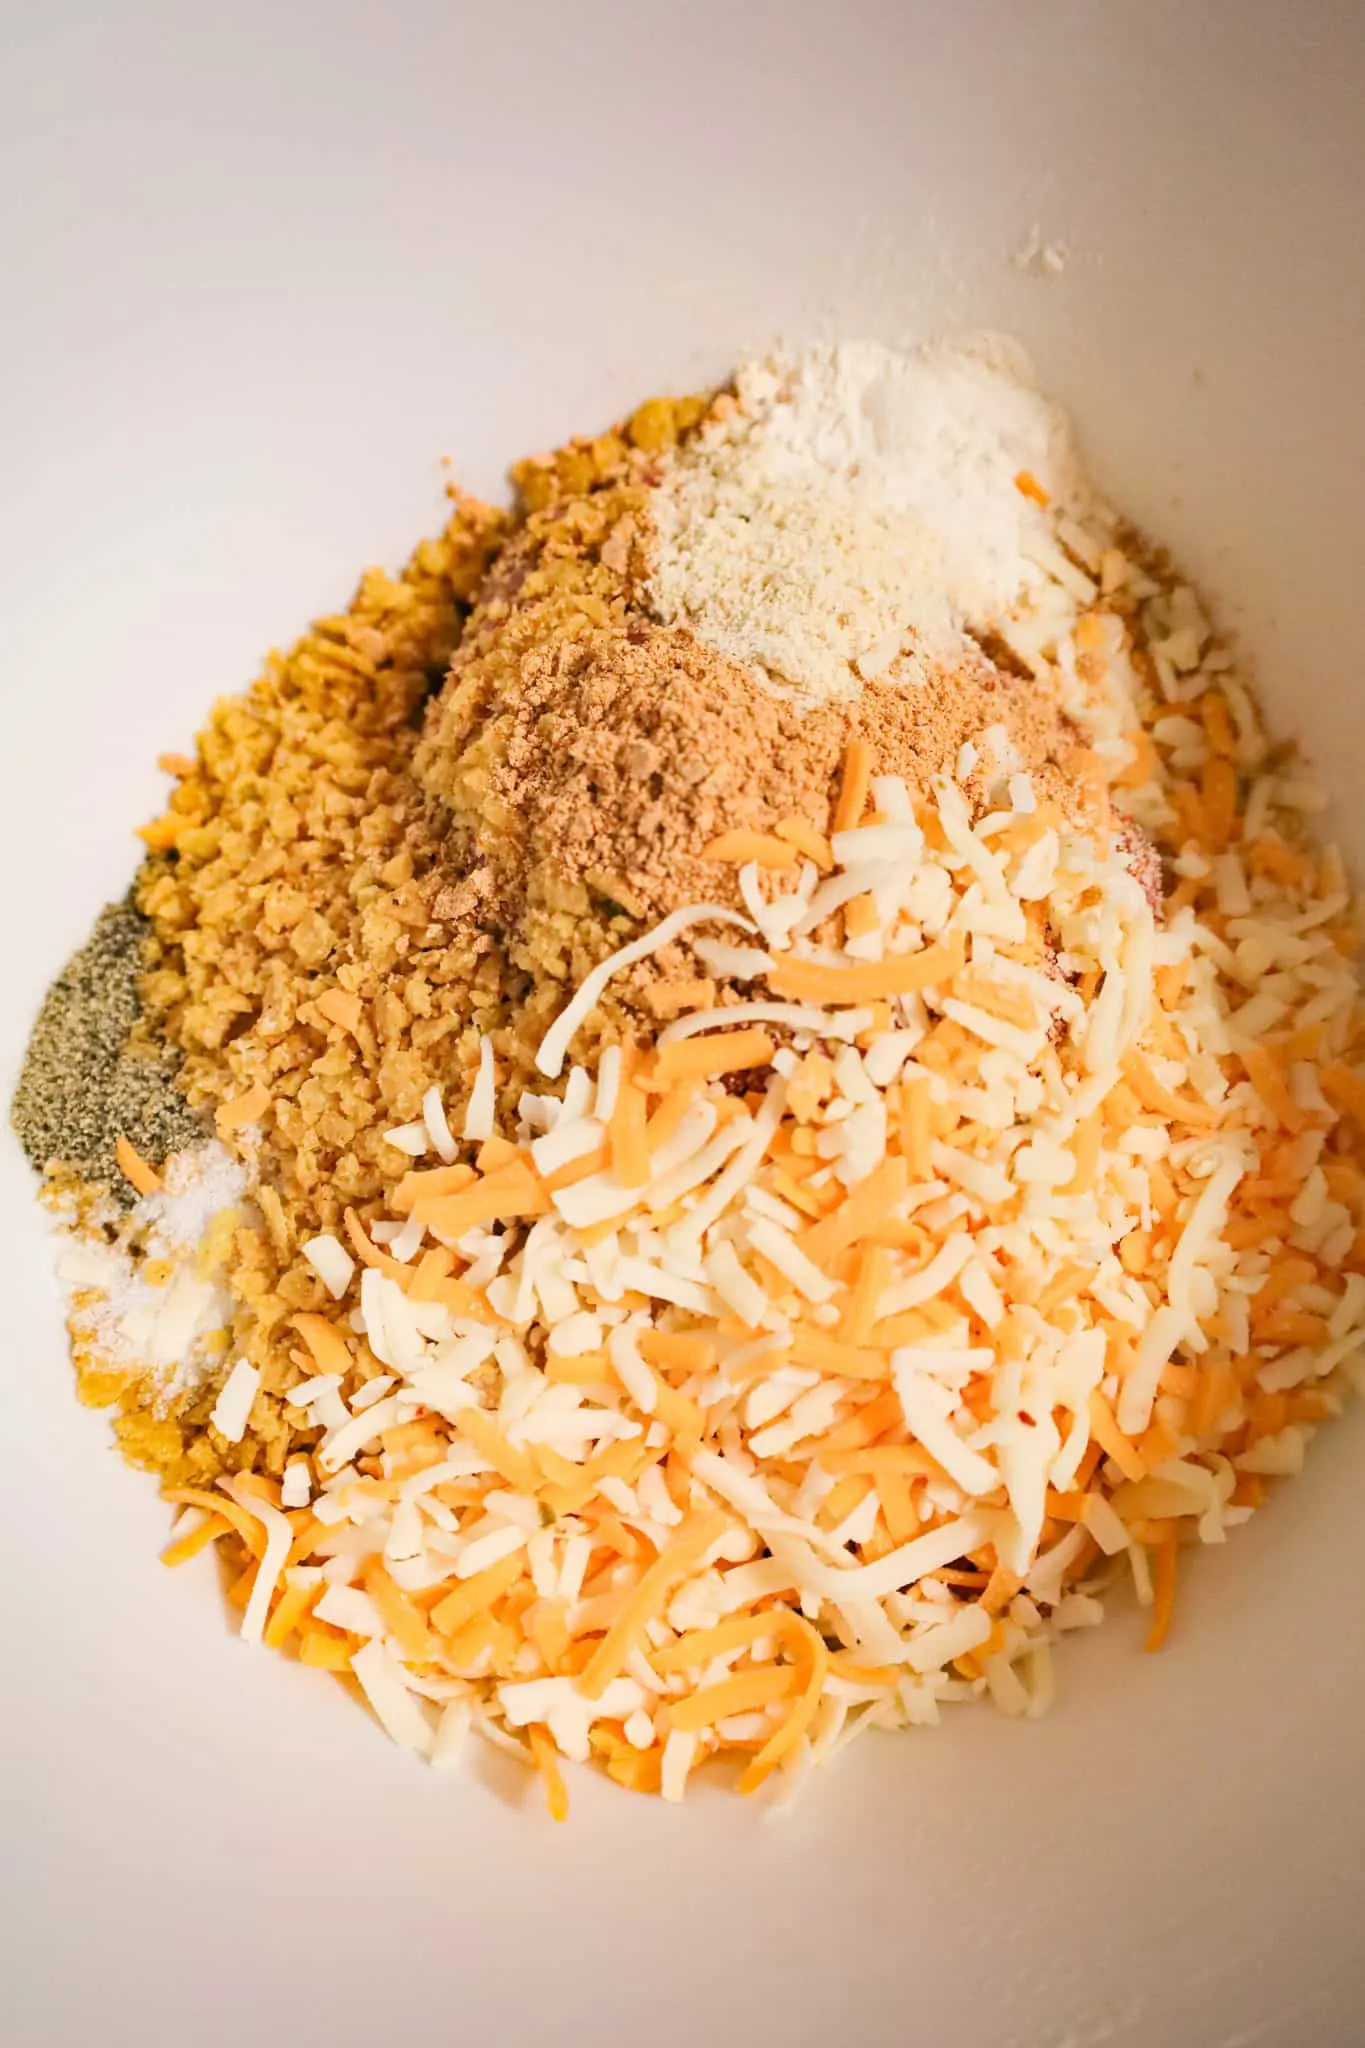 shredded cheese, crushed corn chips, spices and ground beef in a mixing bowl